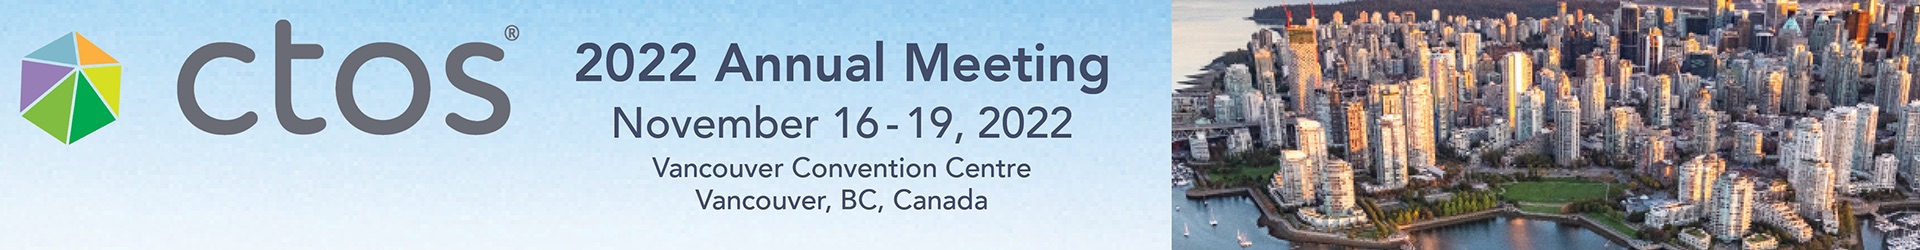 2022 CTOS Annual Meeting Event Banner